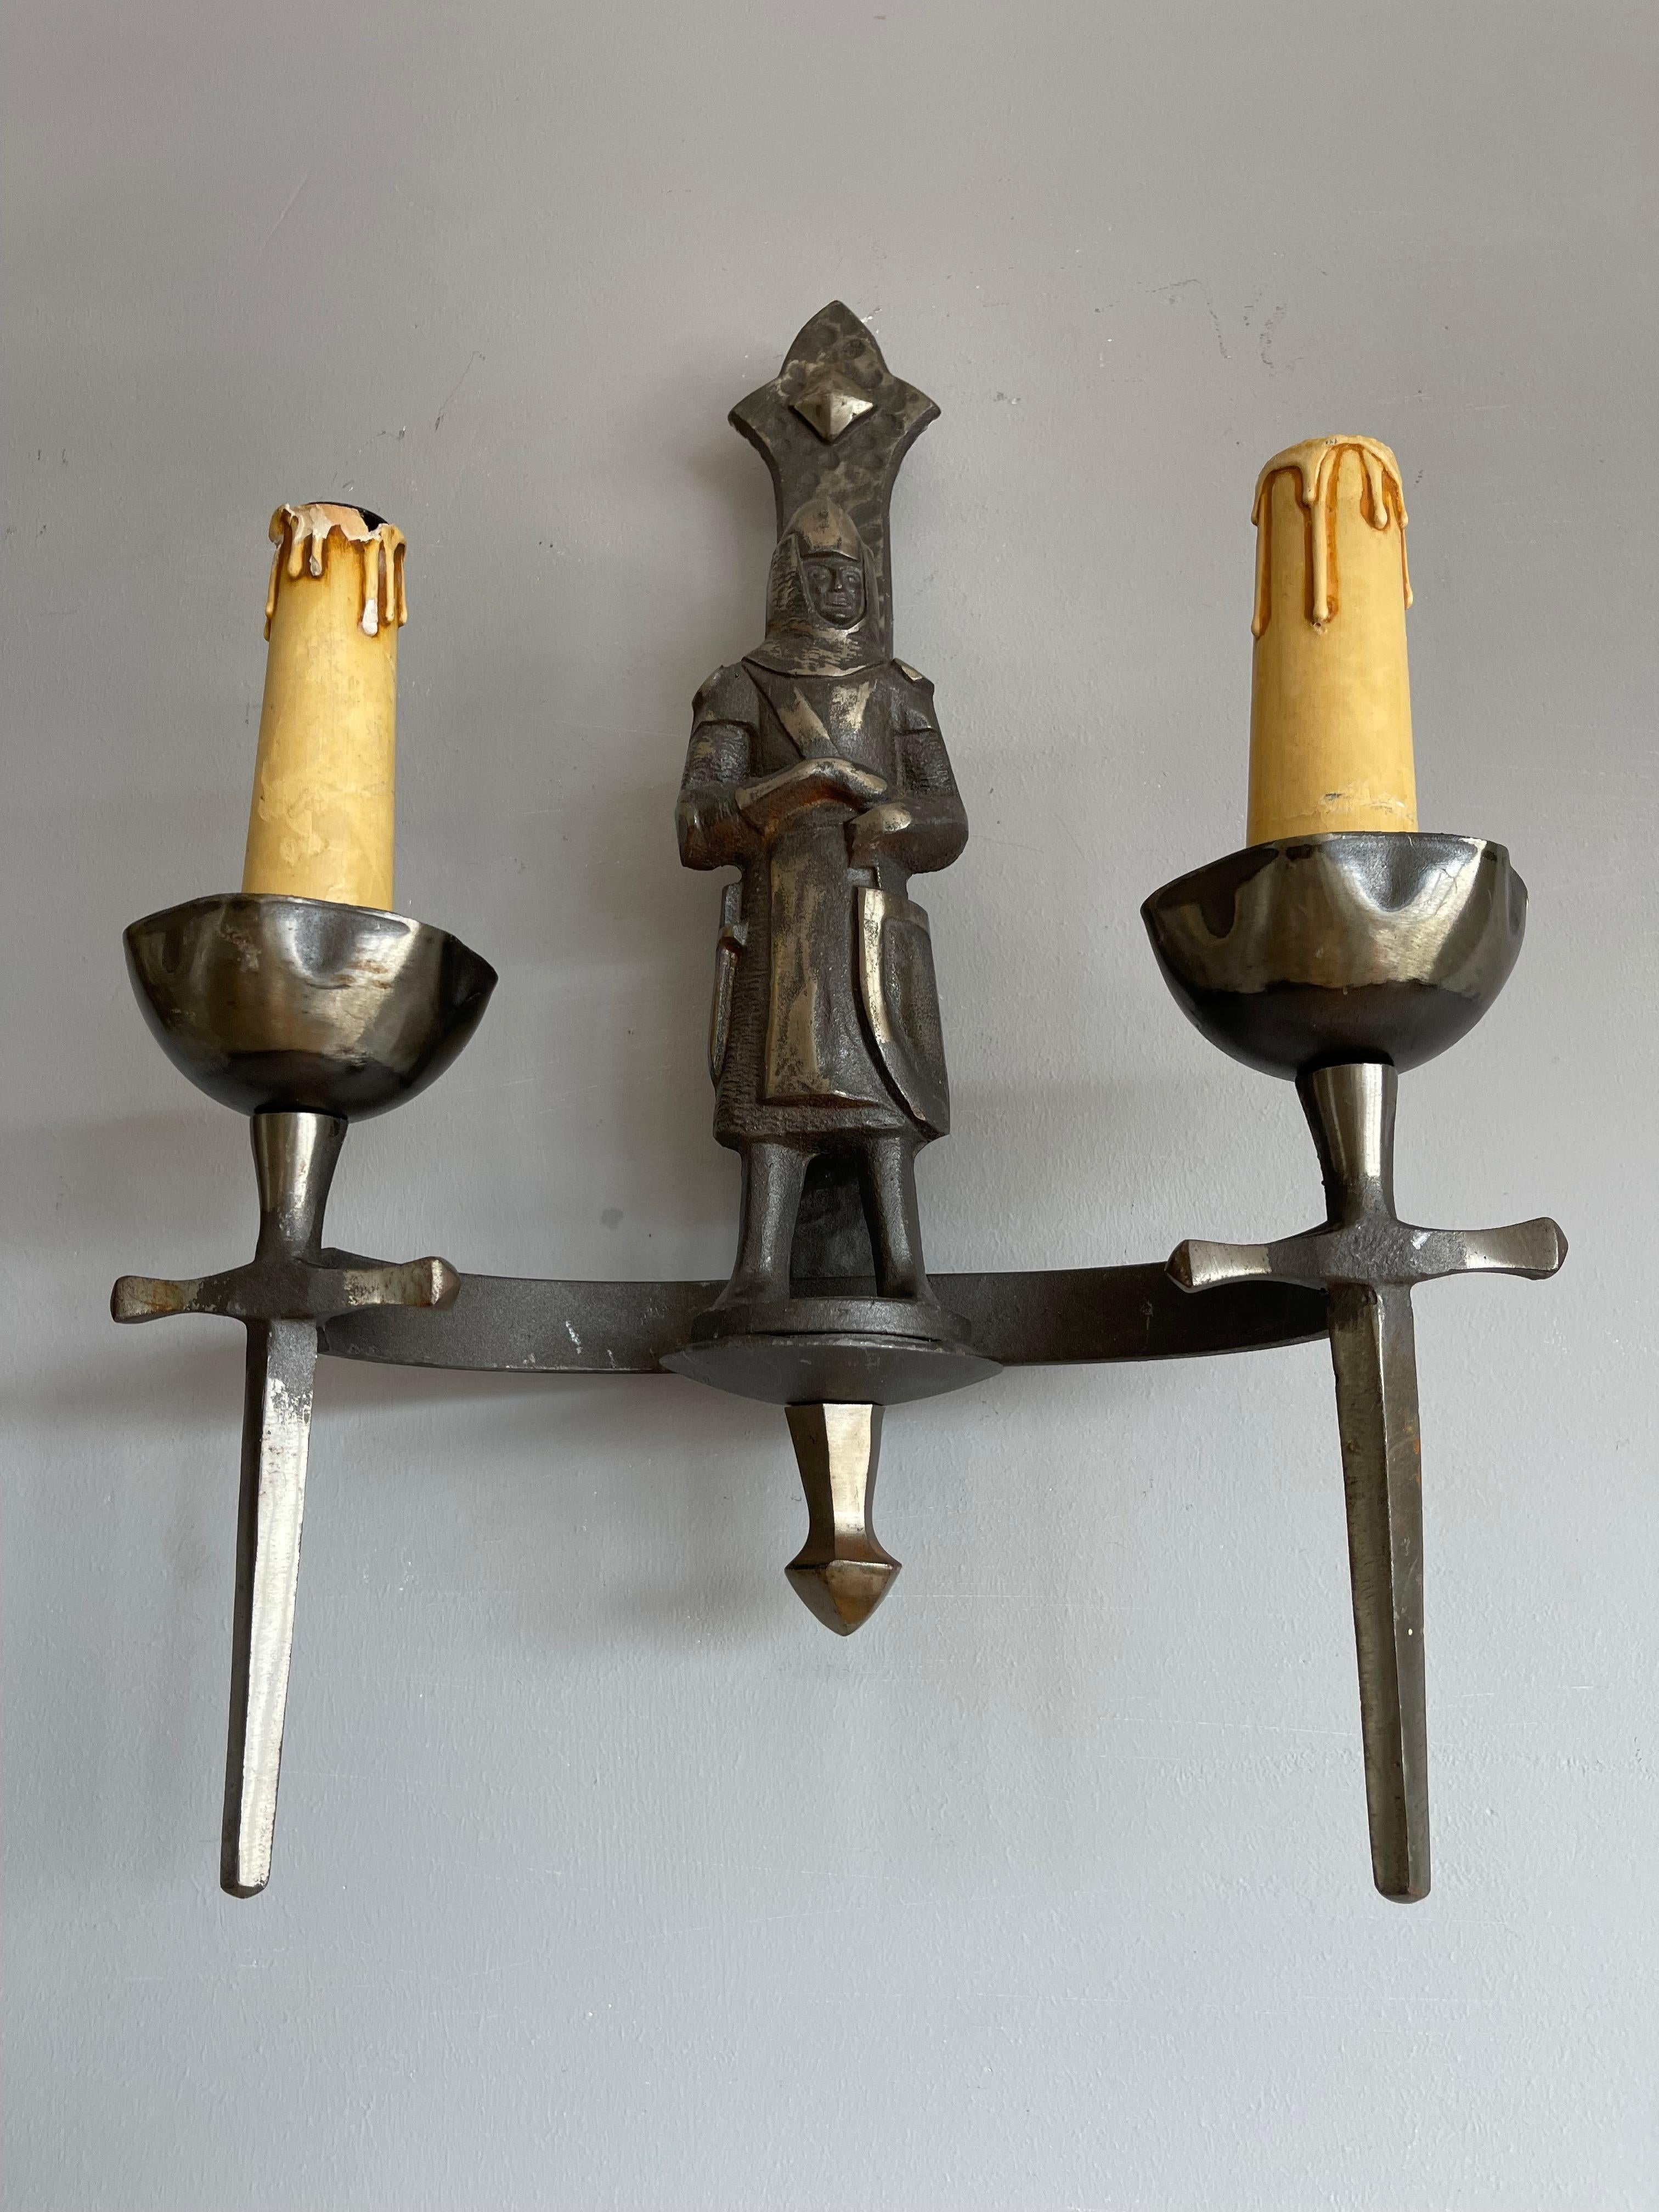 Rare Pair of Two-Light Gothic Revival Bronzed Knight with Swords Wall Sconces 8